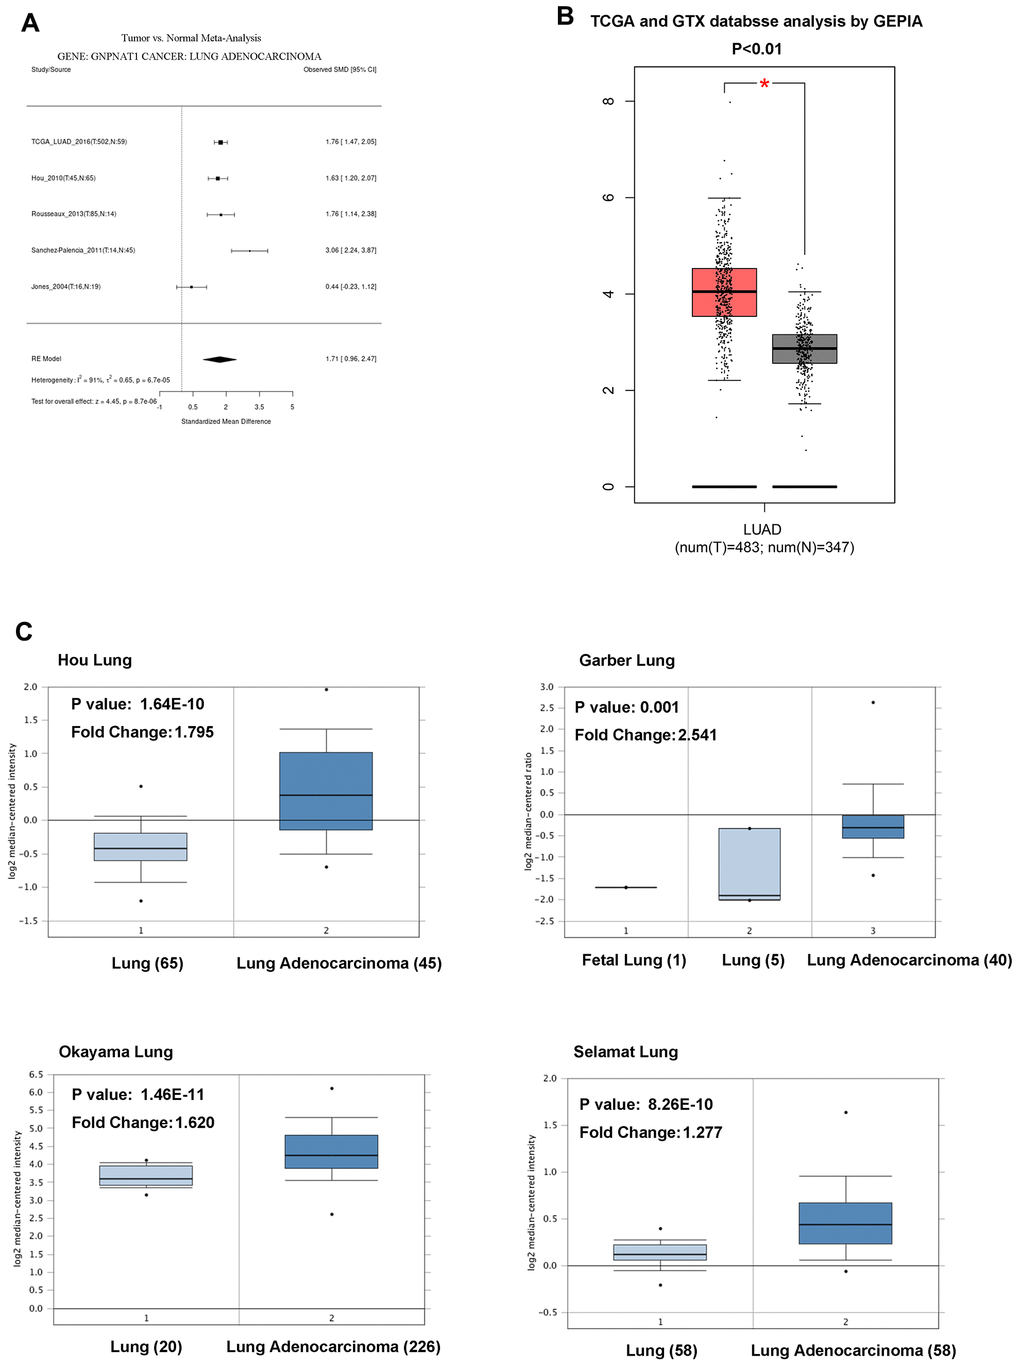 GNPNAT1 transcription level in LUAD. (A) The forest plot shows GNPNAT1 expression level meta-analysis of LUAD tumor tissues and normal tissues in five different LUAD cohorts (LCE). (B) The box plot shows GNPNAT1 mRNA expression levels of LUAD tumor tissues and normal tissues in the TCGA (GEPIA) datasets. (C) The box plot shows GNPNAT1 mRNA expression levels of LUAD tumor tissues and normal tissues in the Garber Lung, Okayama Lung, Selamat Lung, and Hou Lung datasets (Oncomine), respectively.